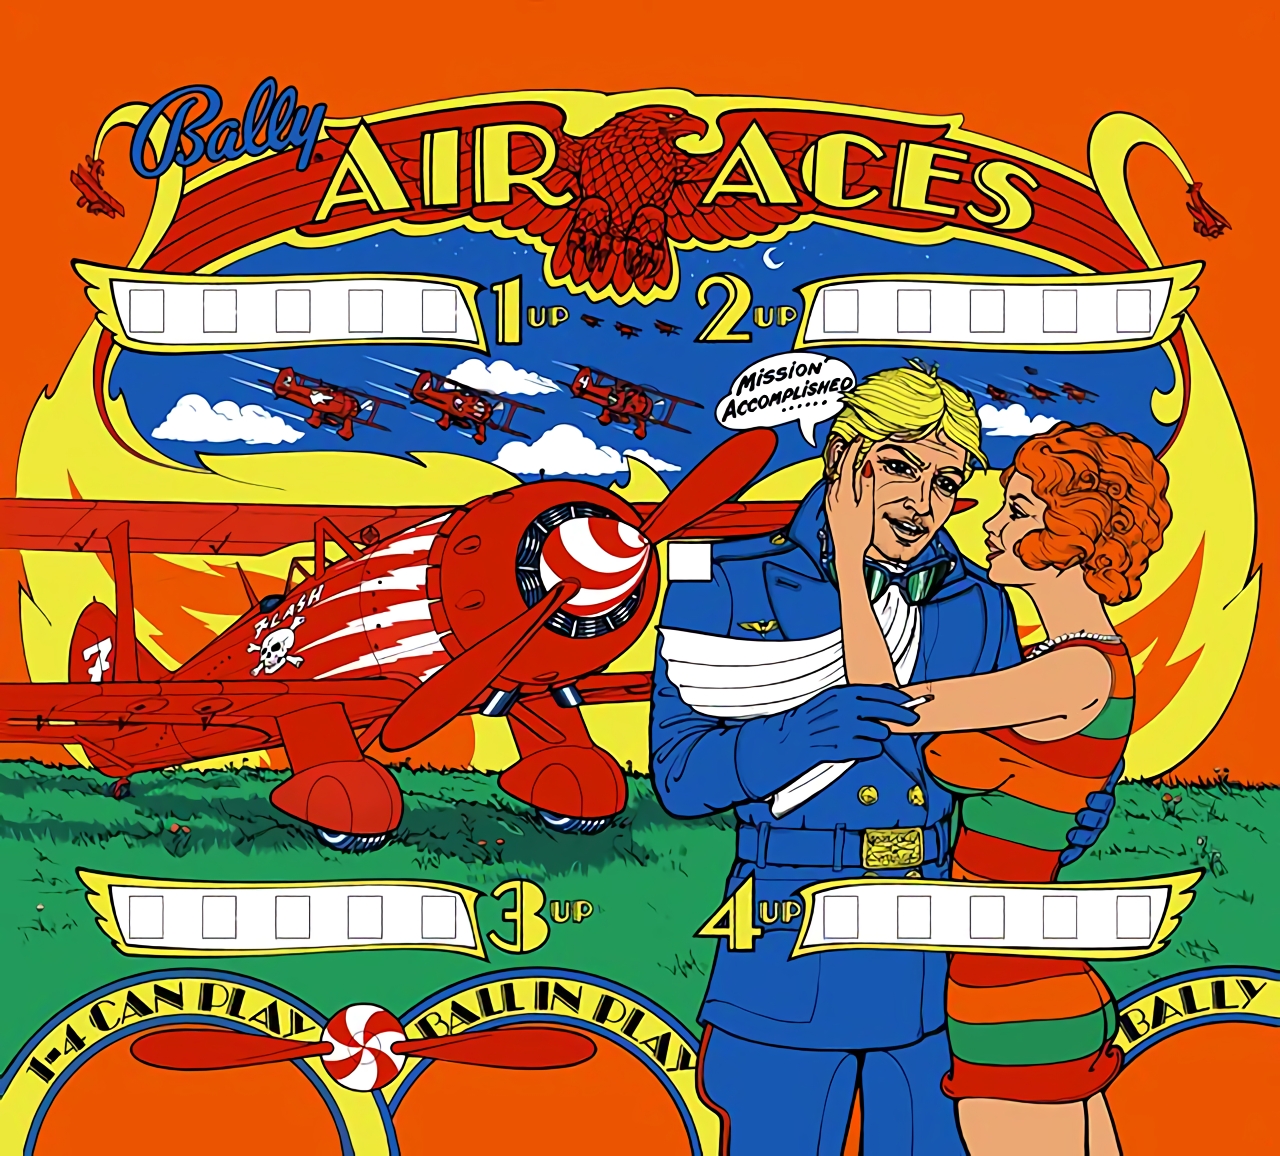 Air Aces (Bally, 1974) (IkeS) Backglass